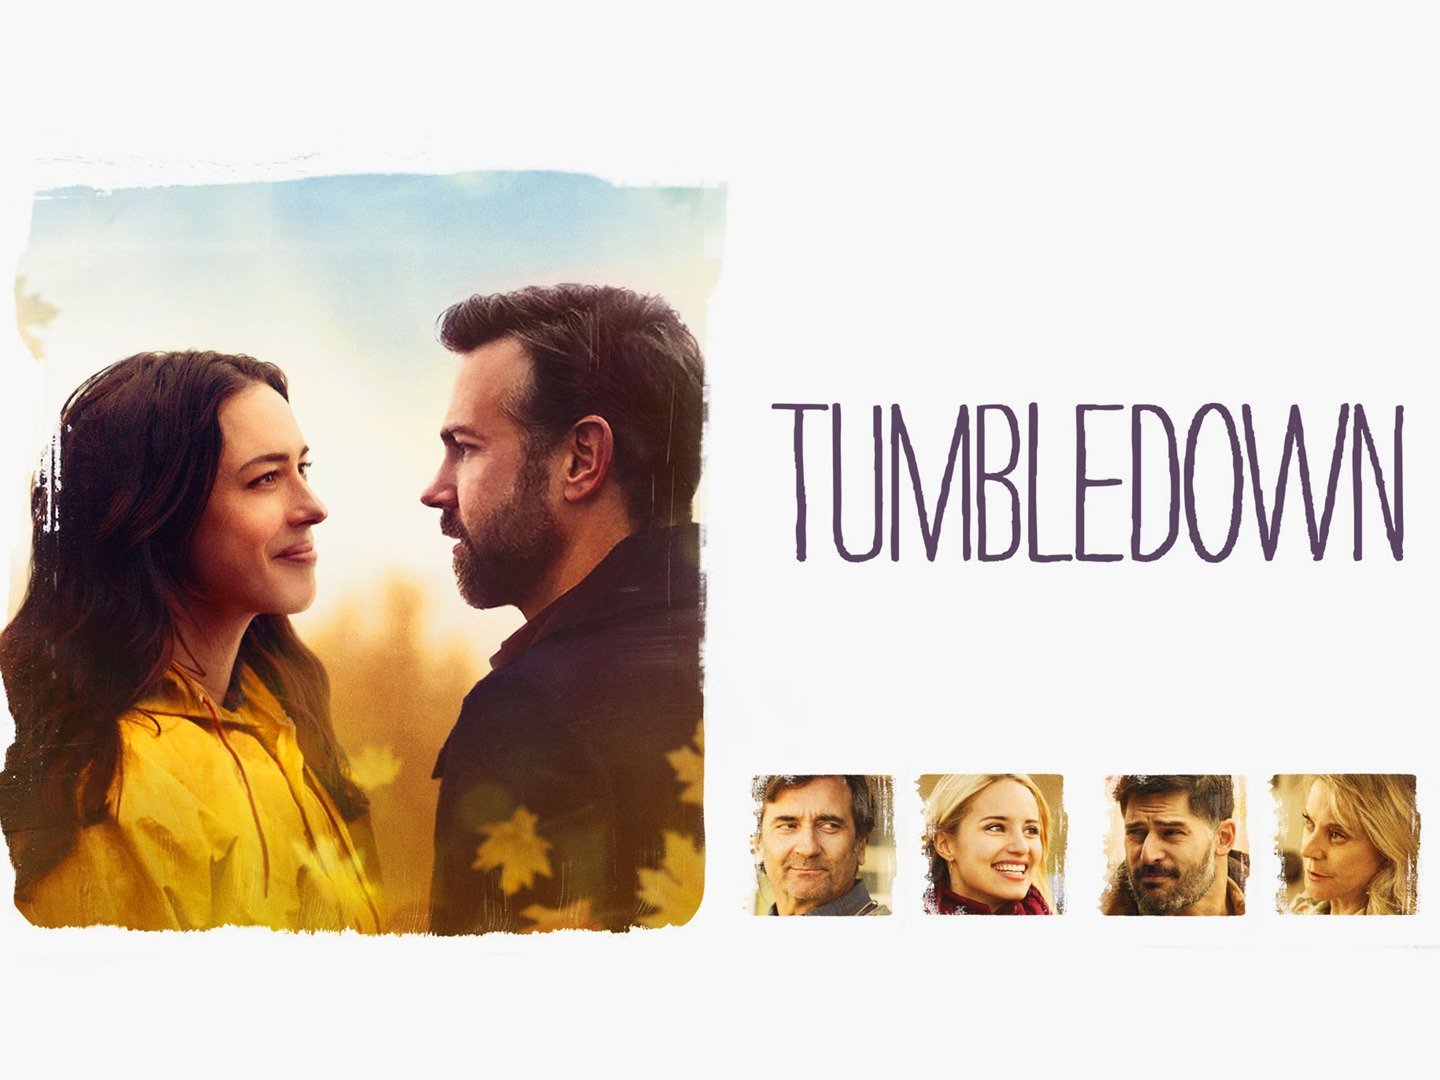 Movie poster for "Tumbledown."